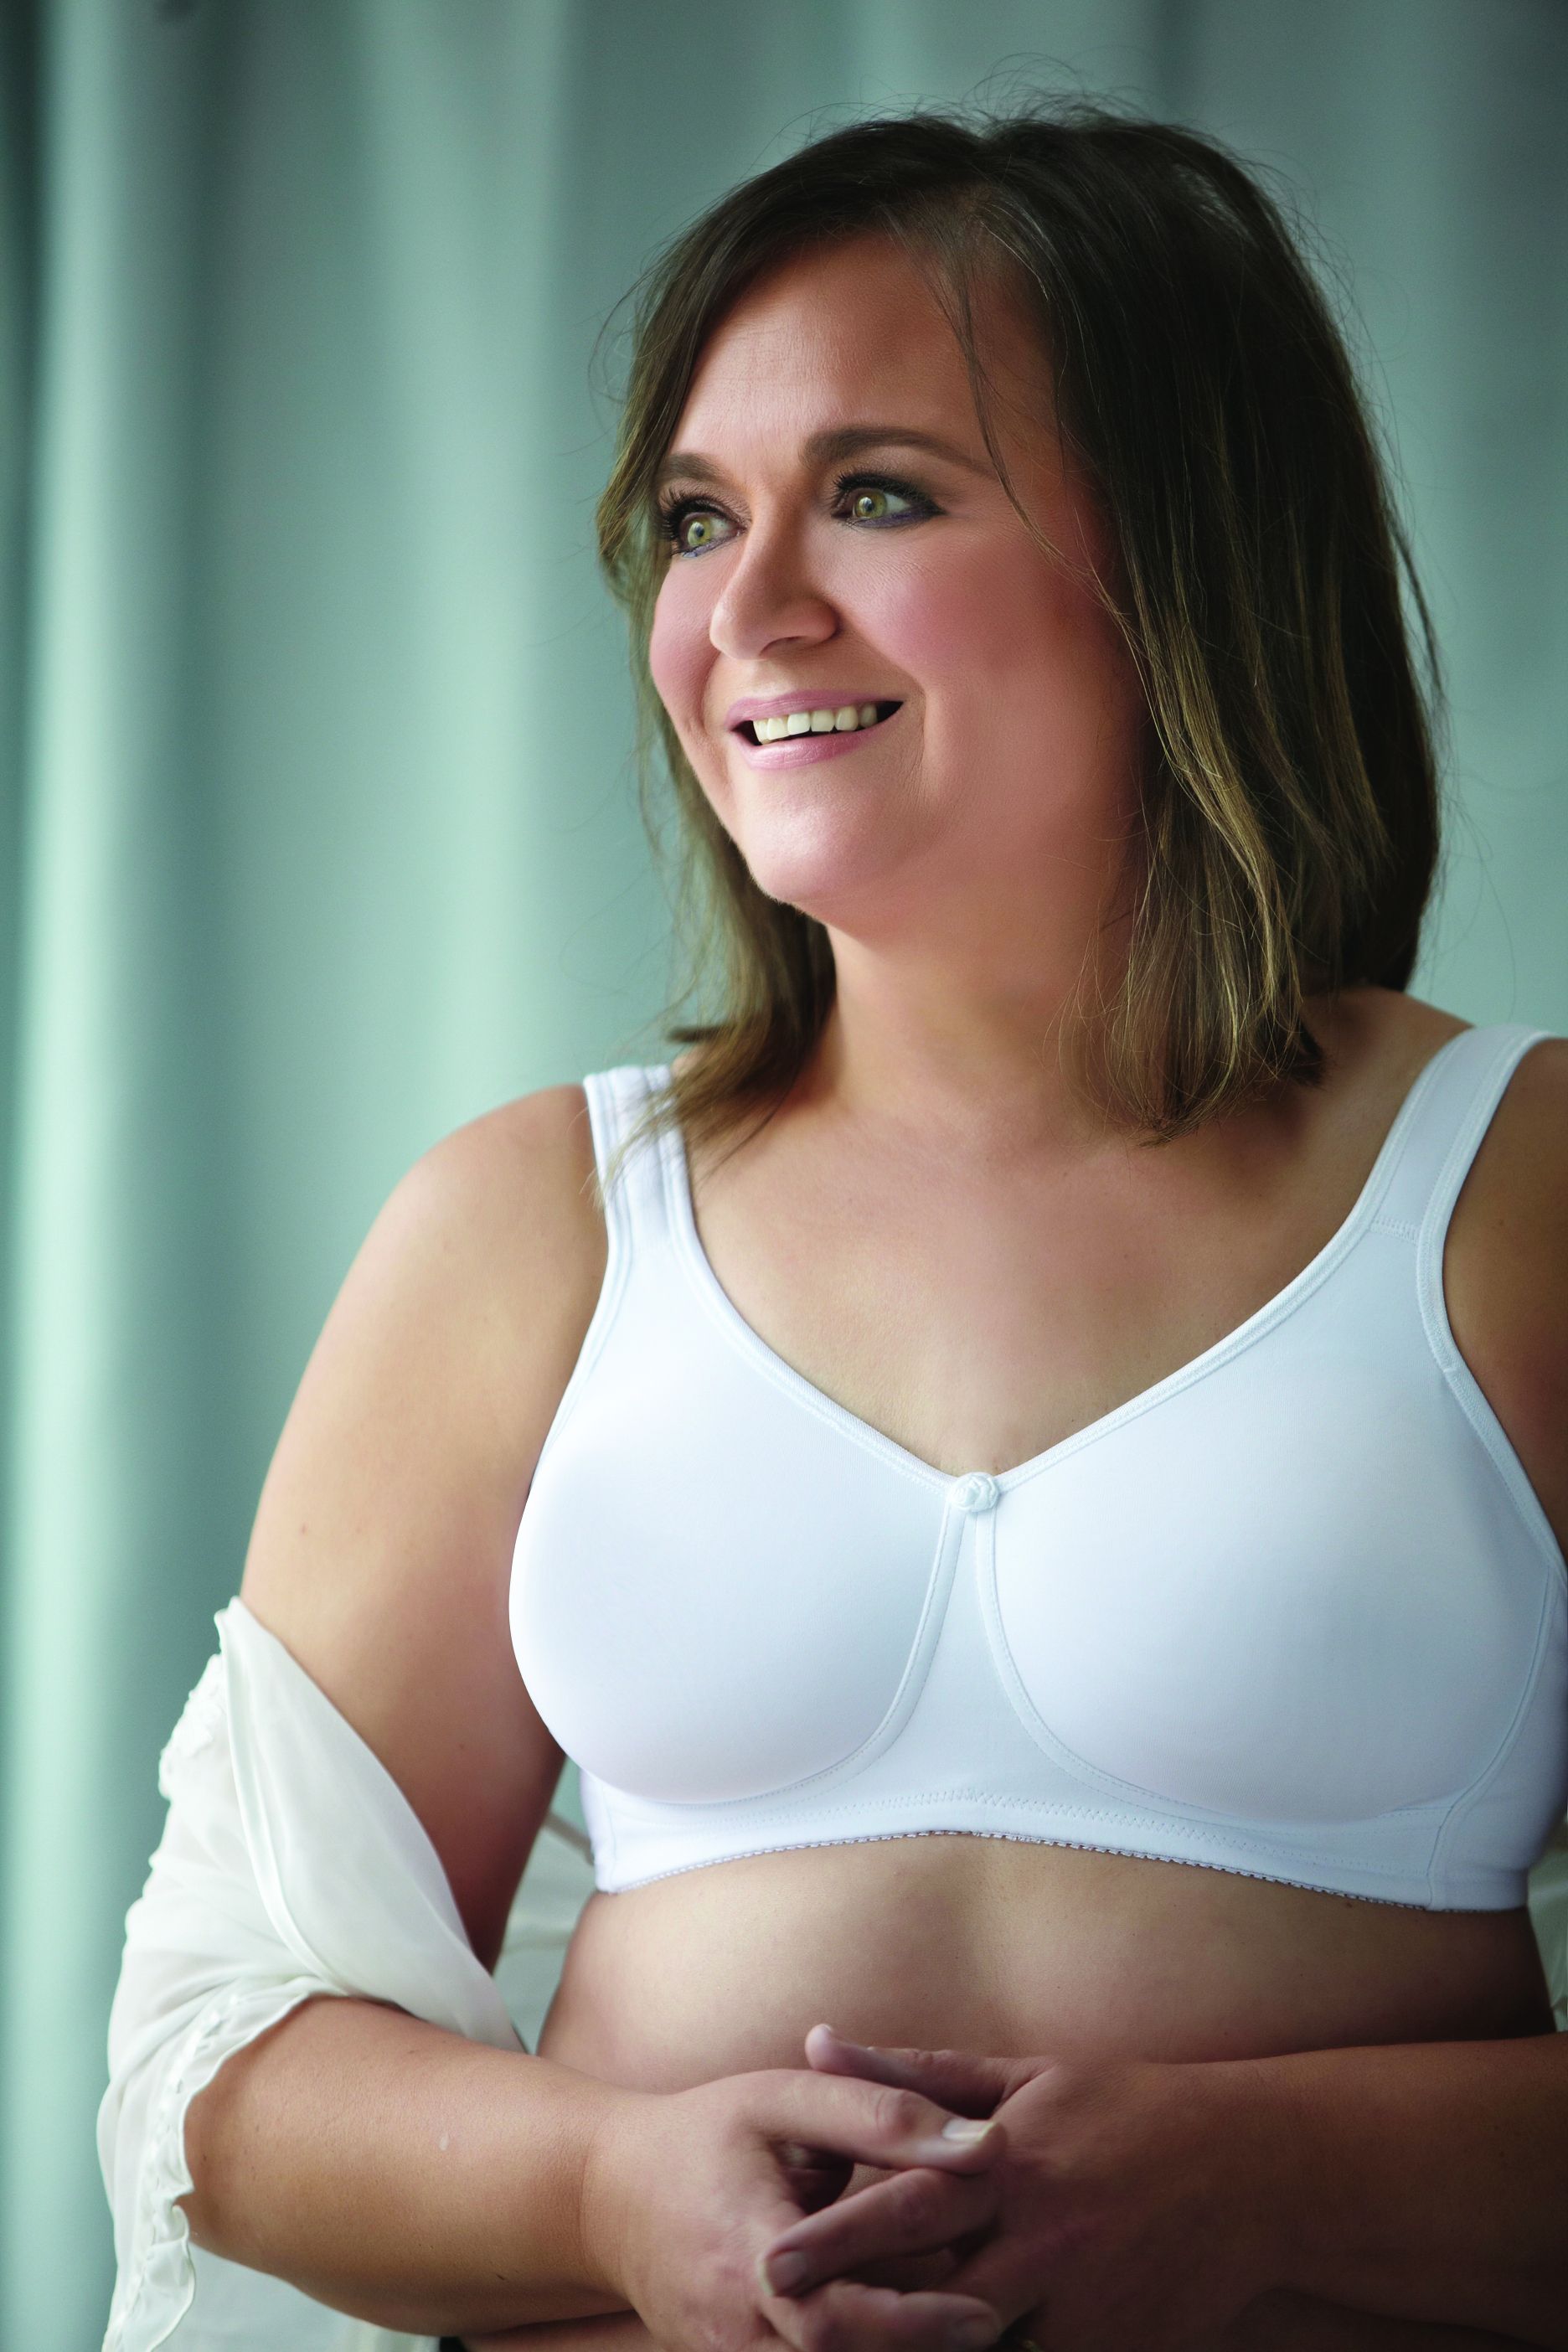 ABC Breast Care 117 Soft Cup Deluxe Contour Mastectomy Bra 32 B Beige